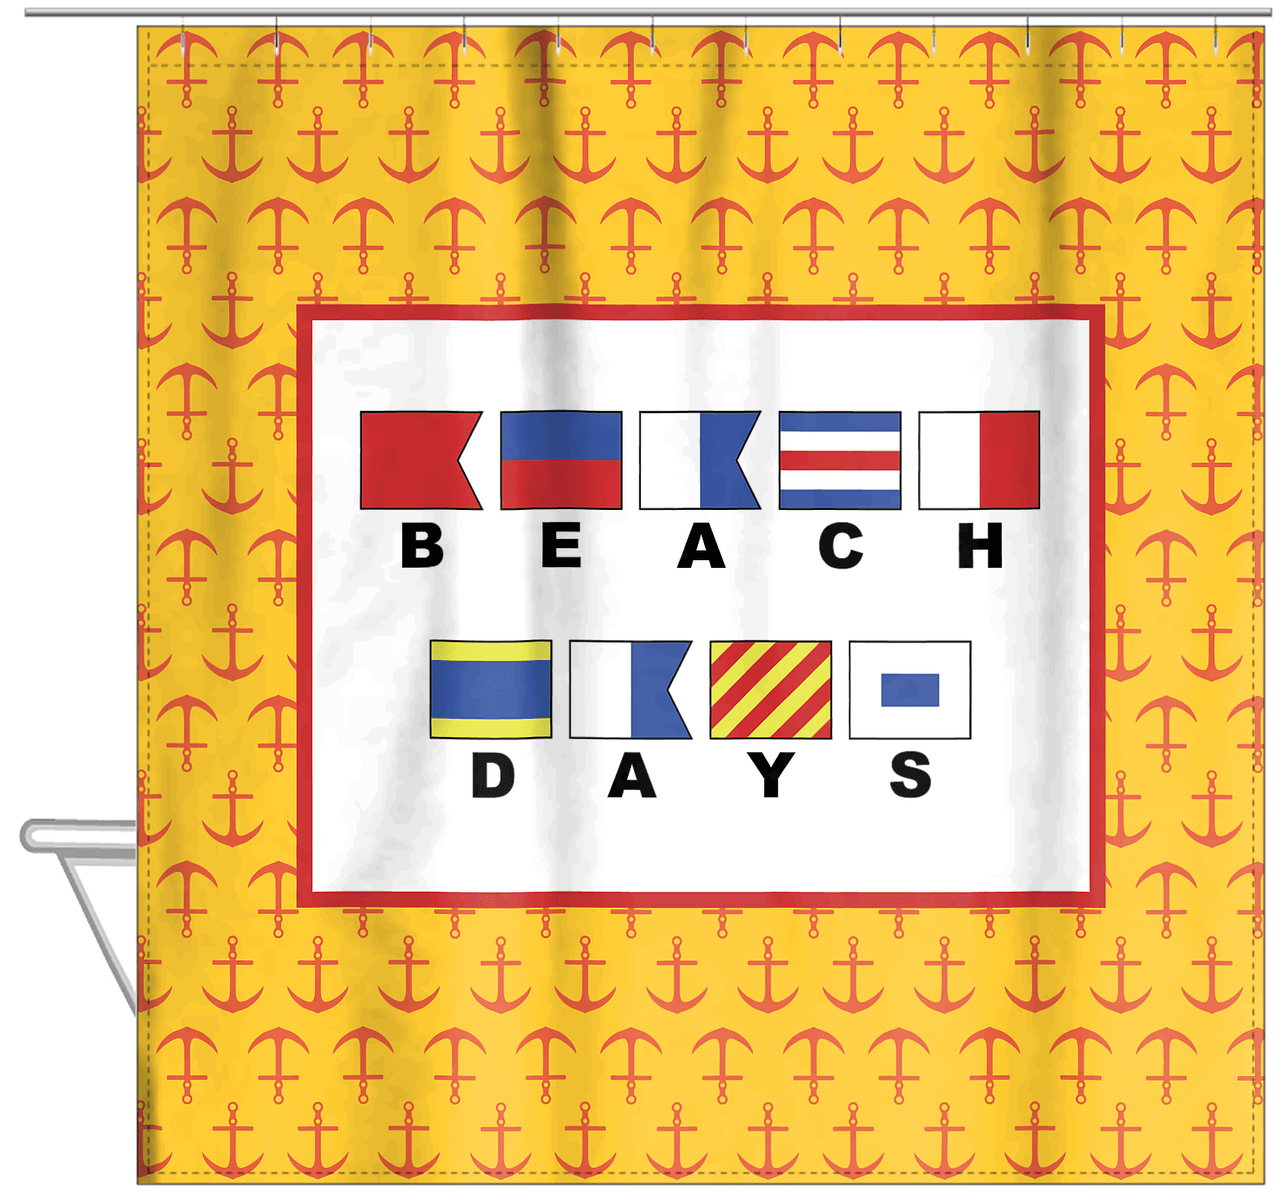 Personalized Nautical Flags Shower Curtain with Anchors - Yellow and Red - Flags with Large Letters - Hanging View